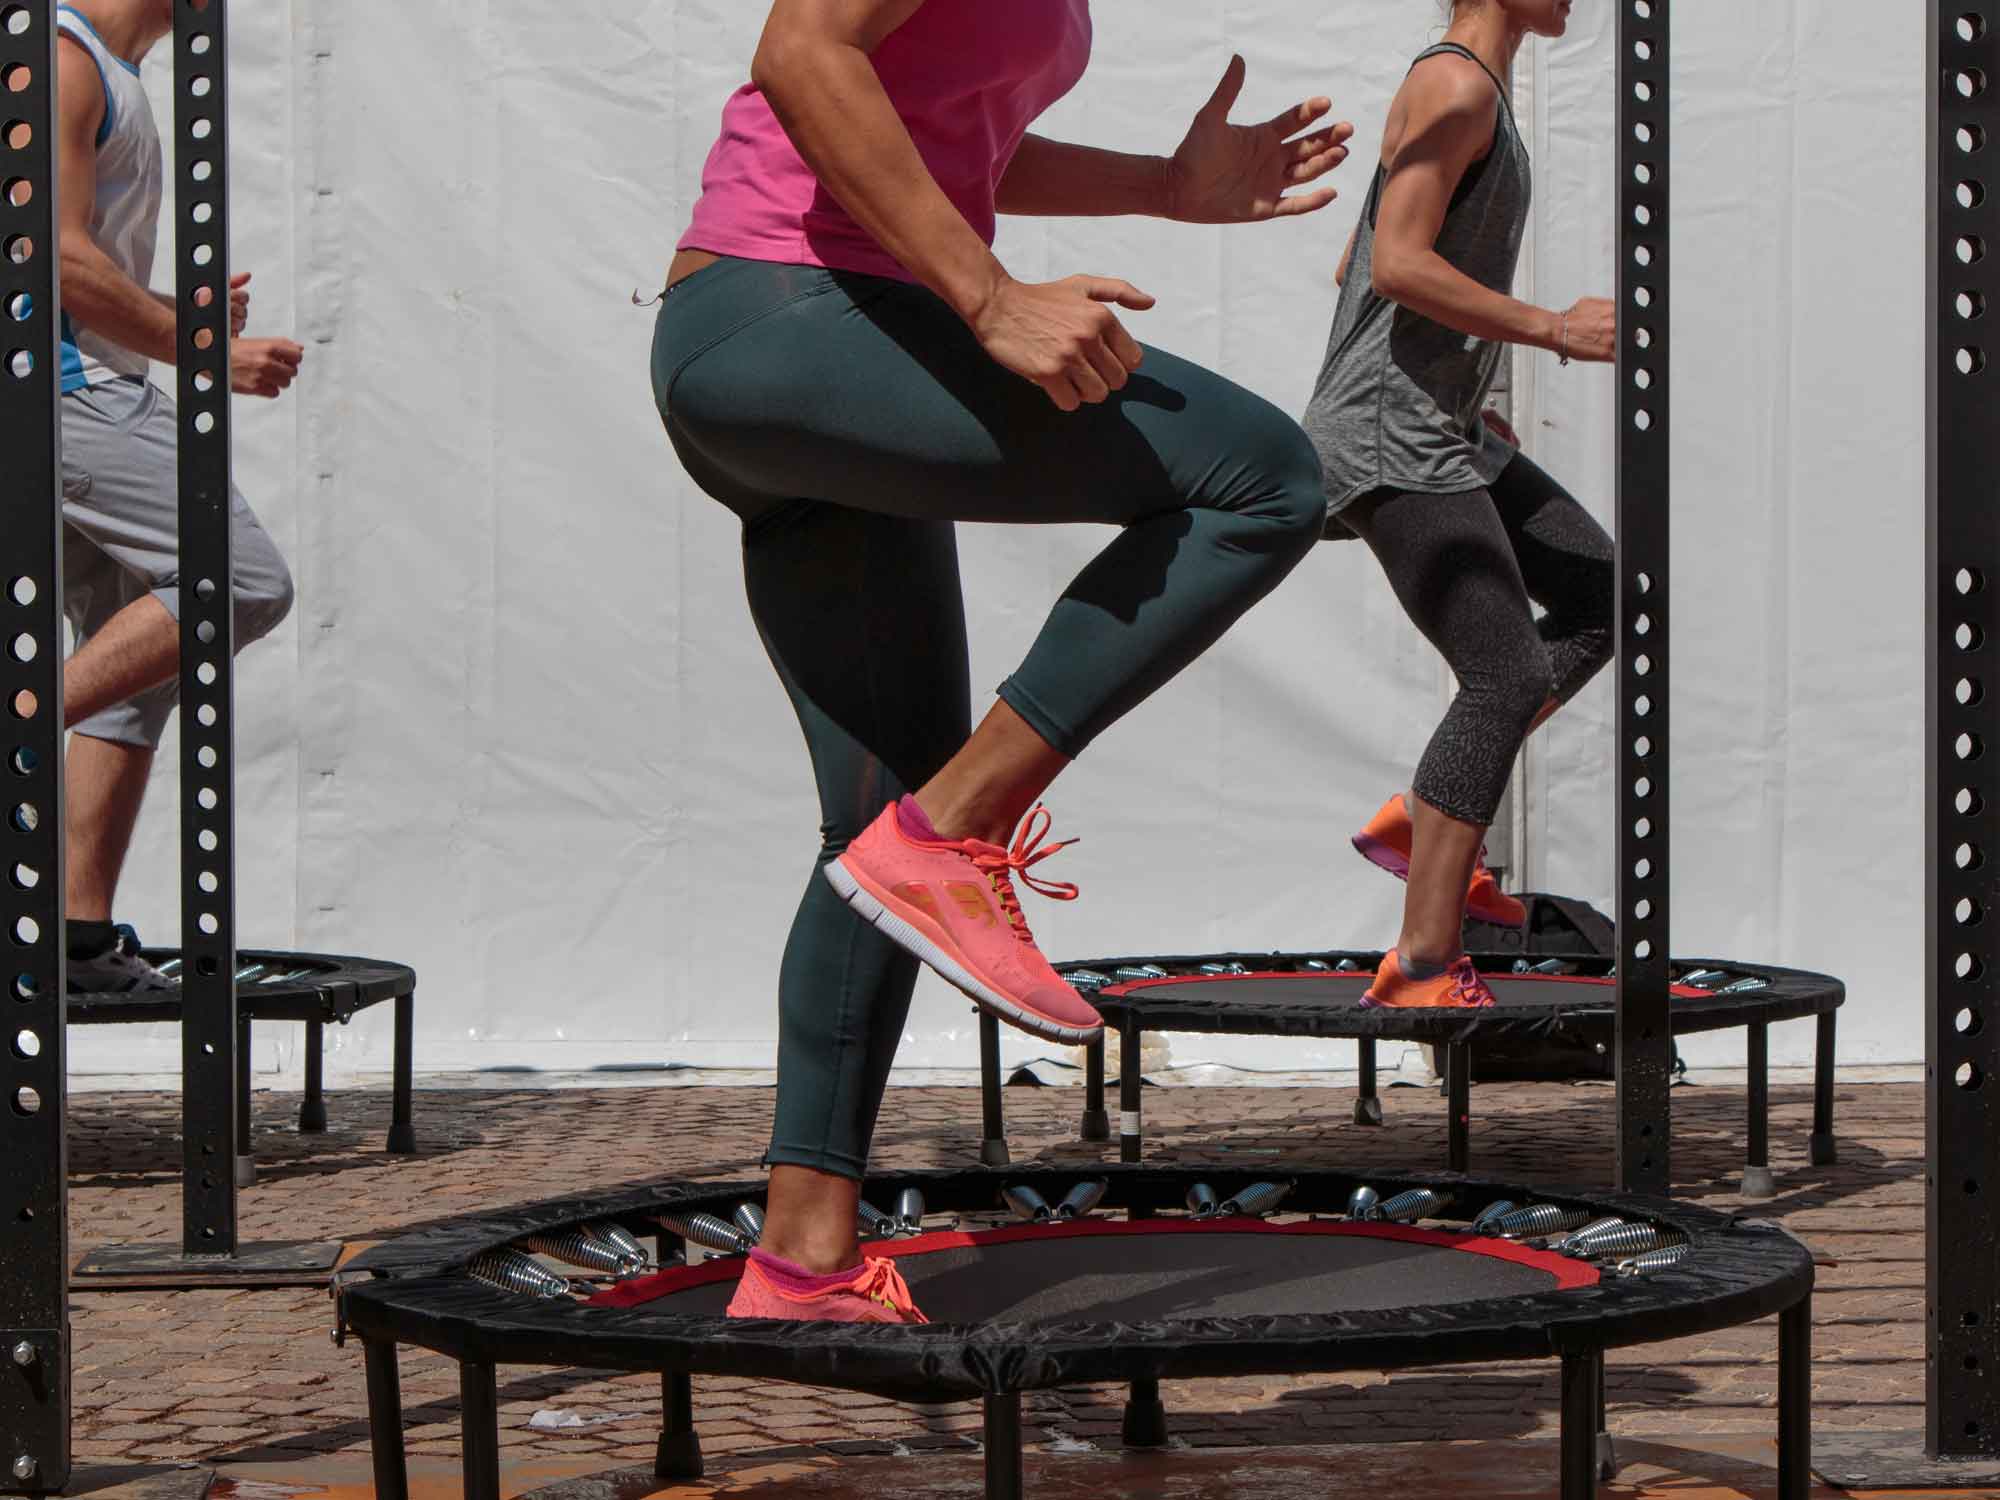 Løve Sømil offentlig How Many Calories Do You Burn Jumping On A Trampoline? - The Jump Central